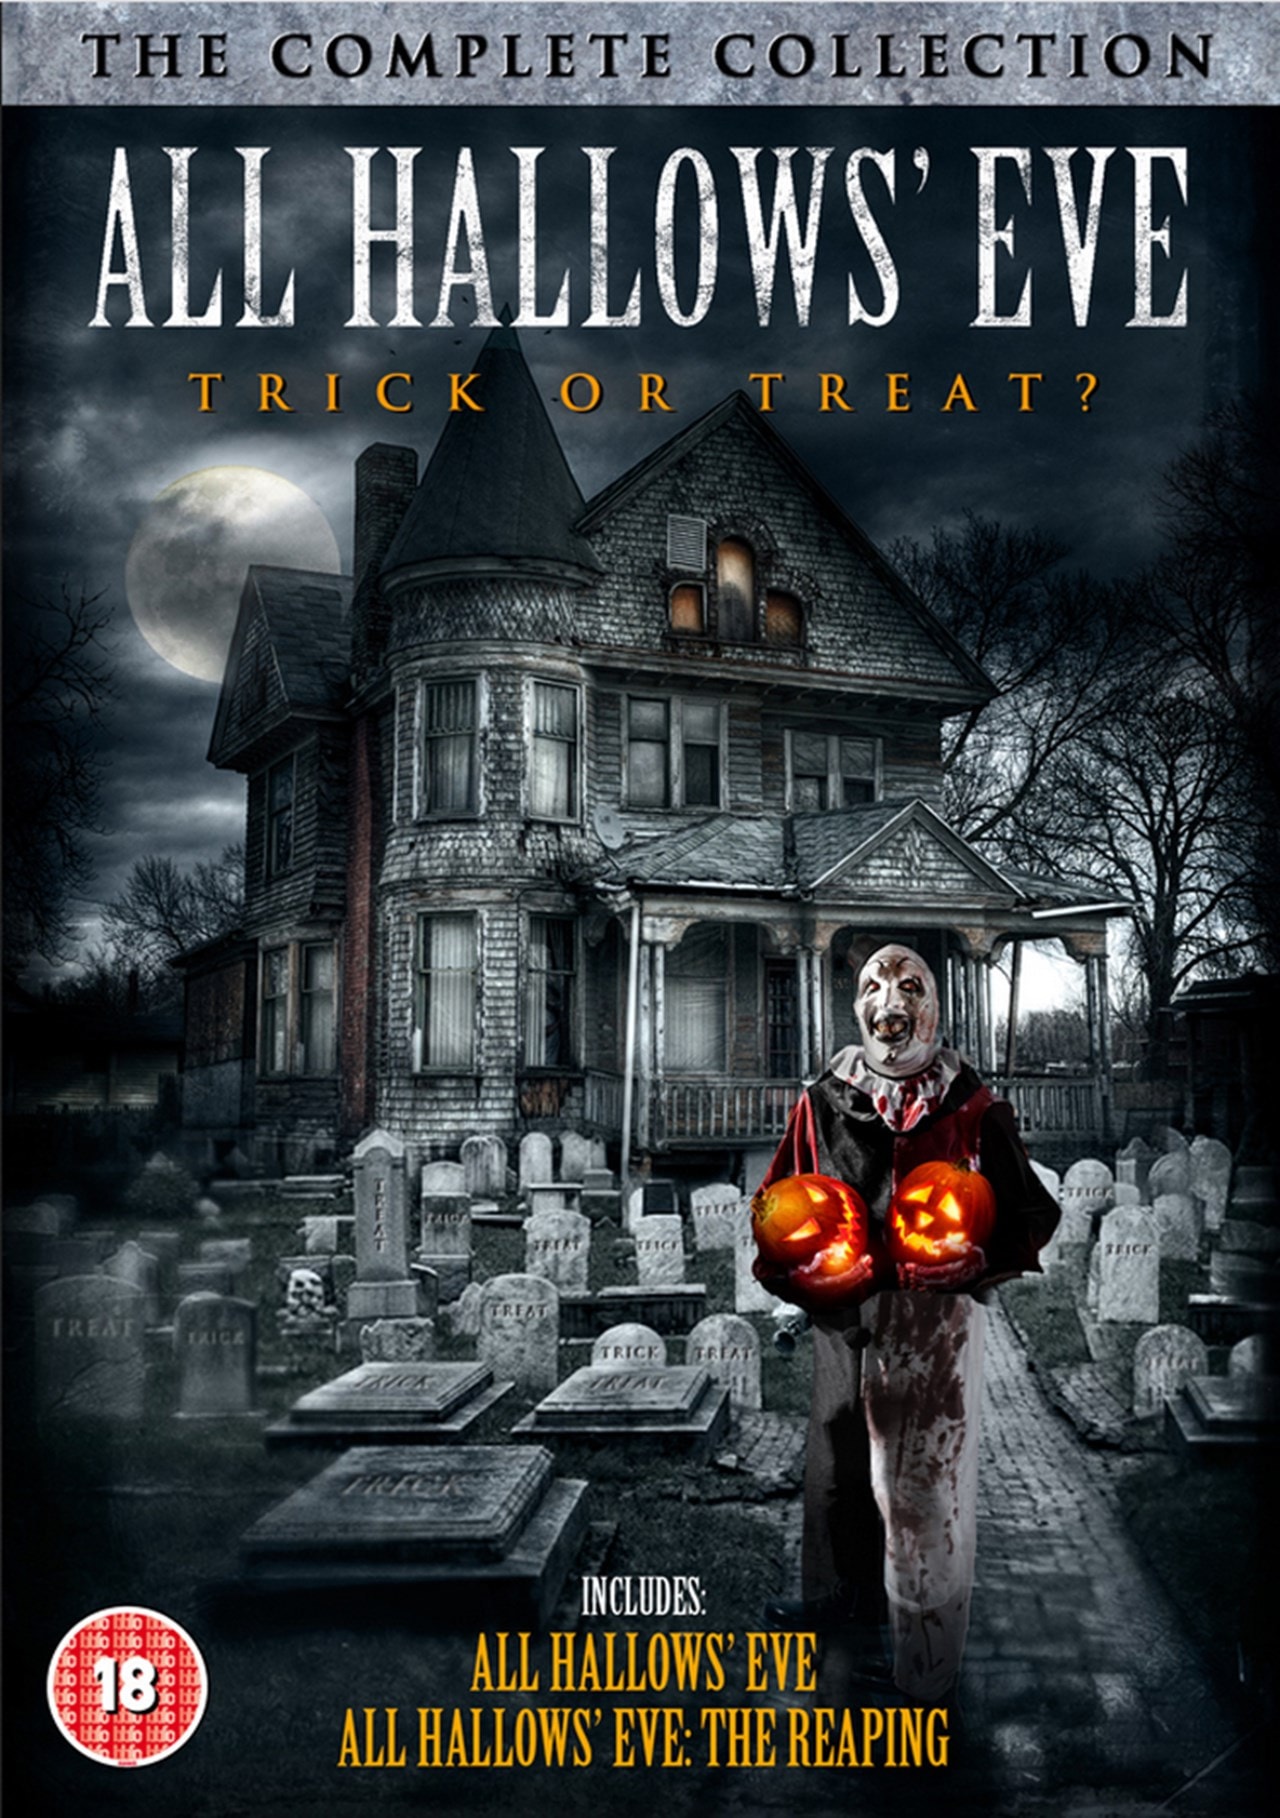 All Hallows' Eve The Complete Collection DVD Free shipping over £20 HMV Store